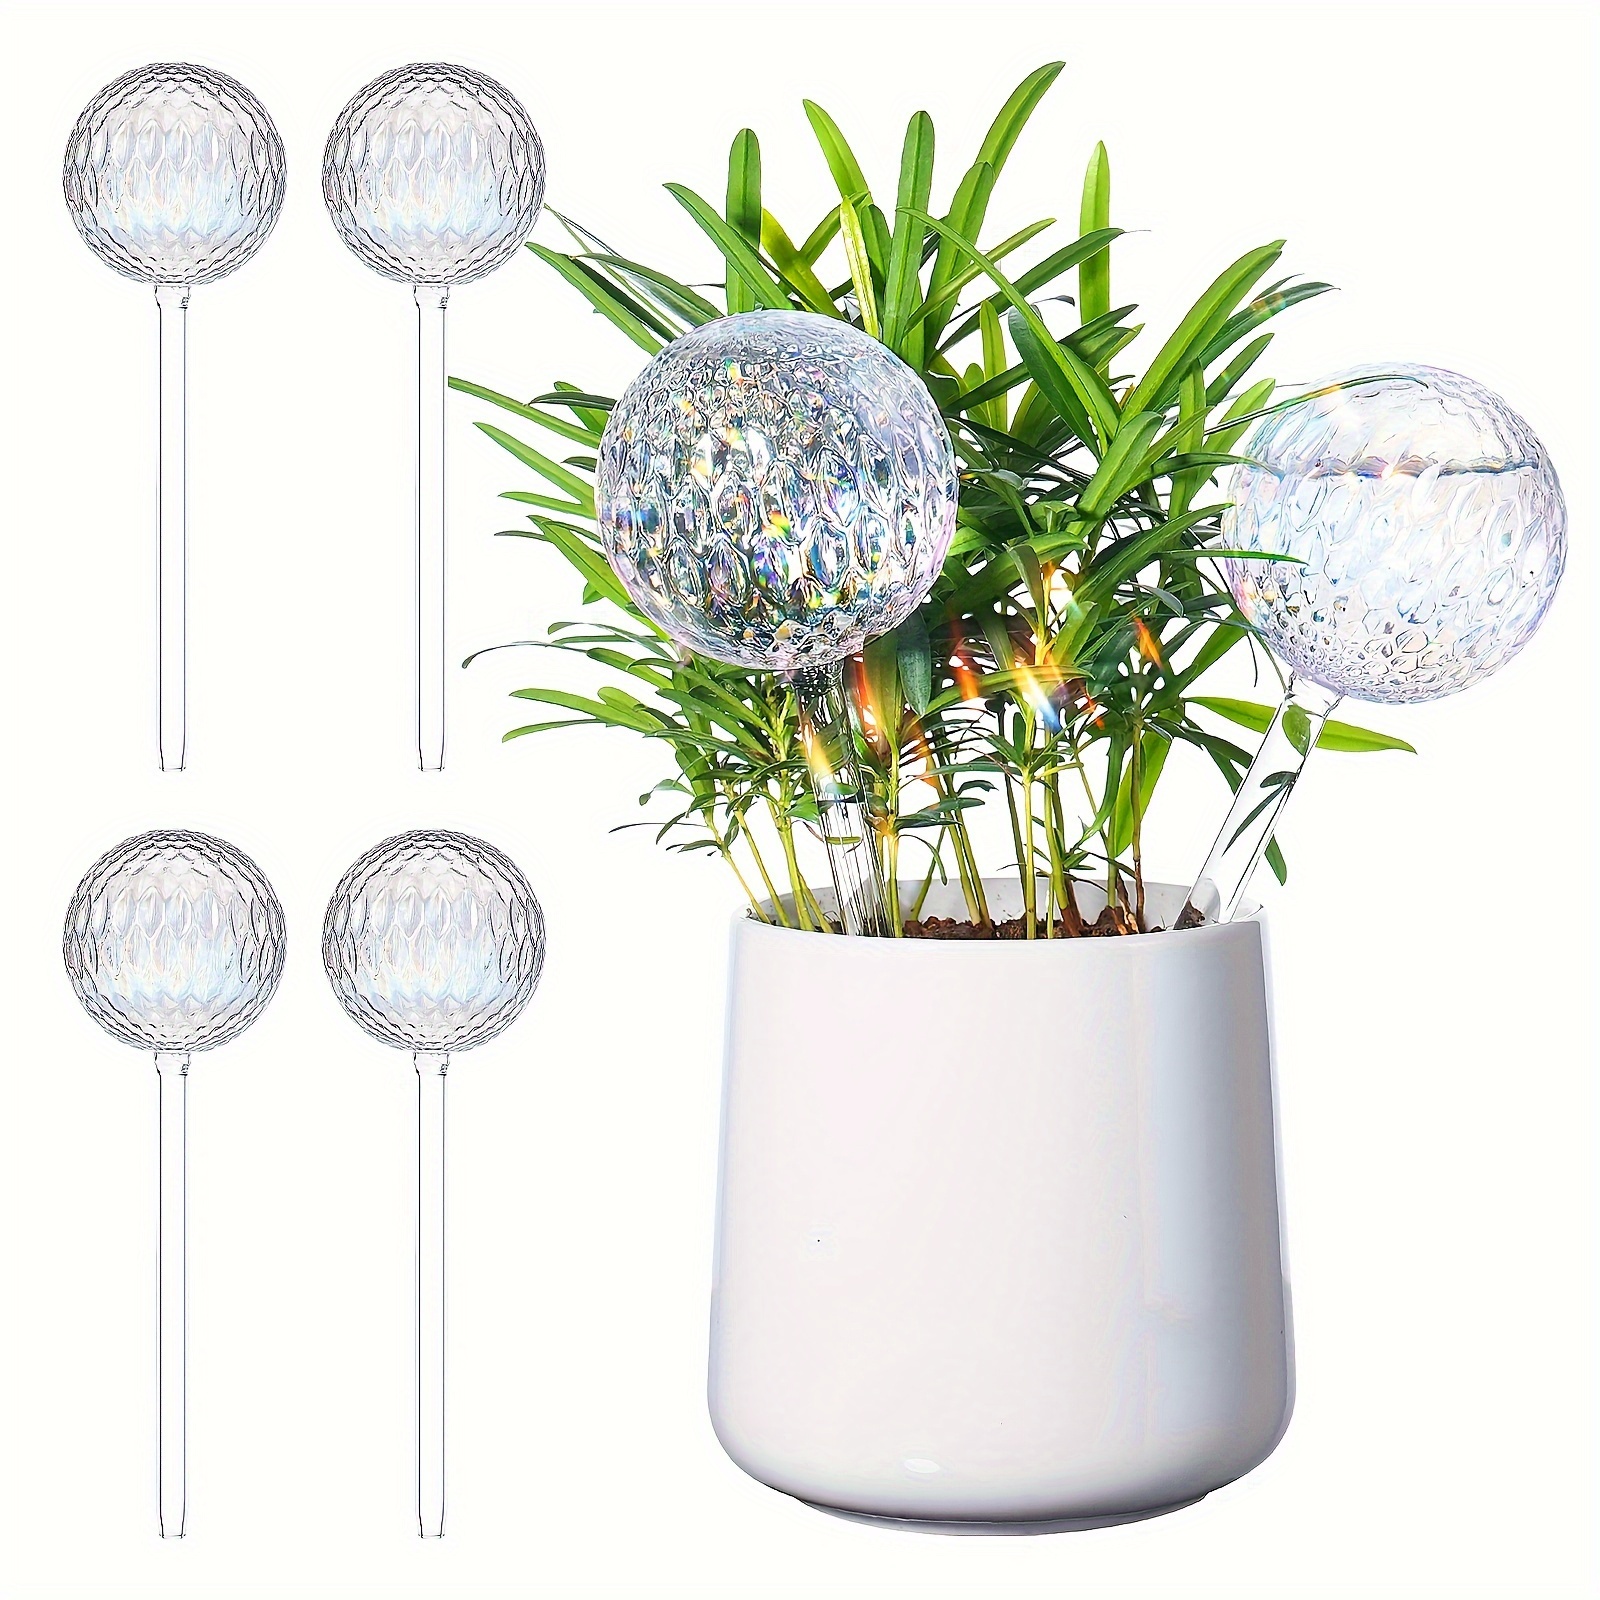 

4pcs Watering Globes For Indoor Plants, Patterned Glass Plant Bulbs For Watering, Water Plants While Away, Plant Gifts Home Decor